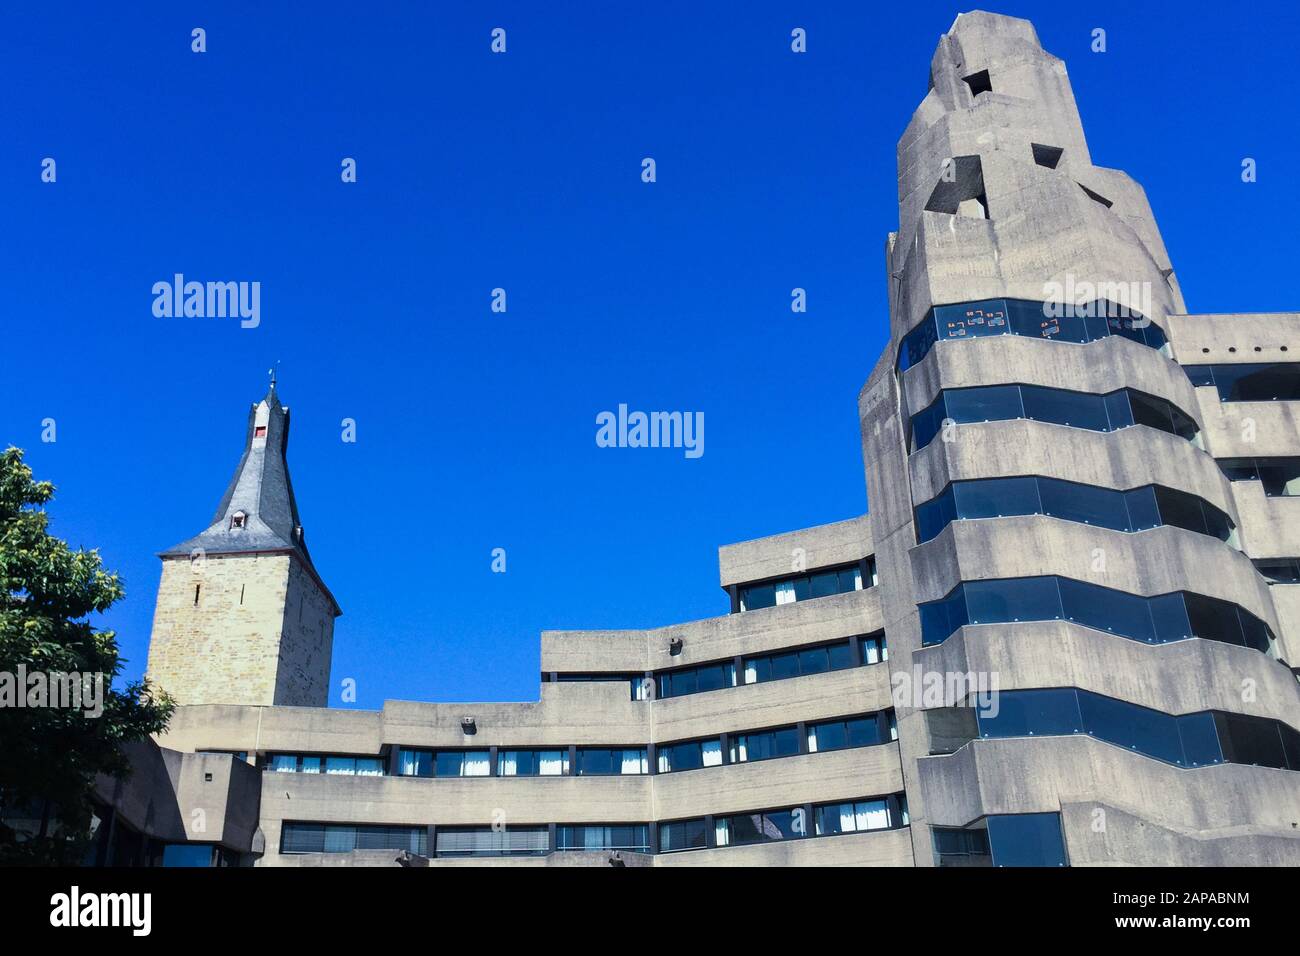 Bergisch Gladbach, Germany. 21st Sep, 2019. View of the town hall of Bensberg by architect Gottfried Böhm. Churches like mountains, town halls like castles - but all made of concrete: this is the trademark of the architect Gottfried Böhm, who was in demand in the post-war period like no other. Now he is turning 100 (to dpa: "The God of Concrete - Architect Gottfried Böhm turns 100") Credit: Volker Danisch/dpa/Alamy Live News Stock Photo